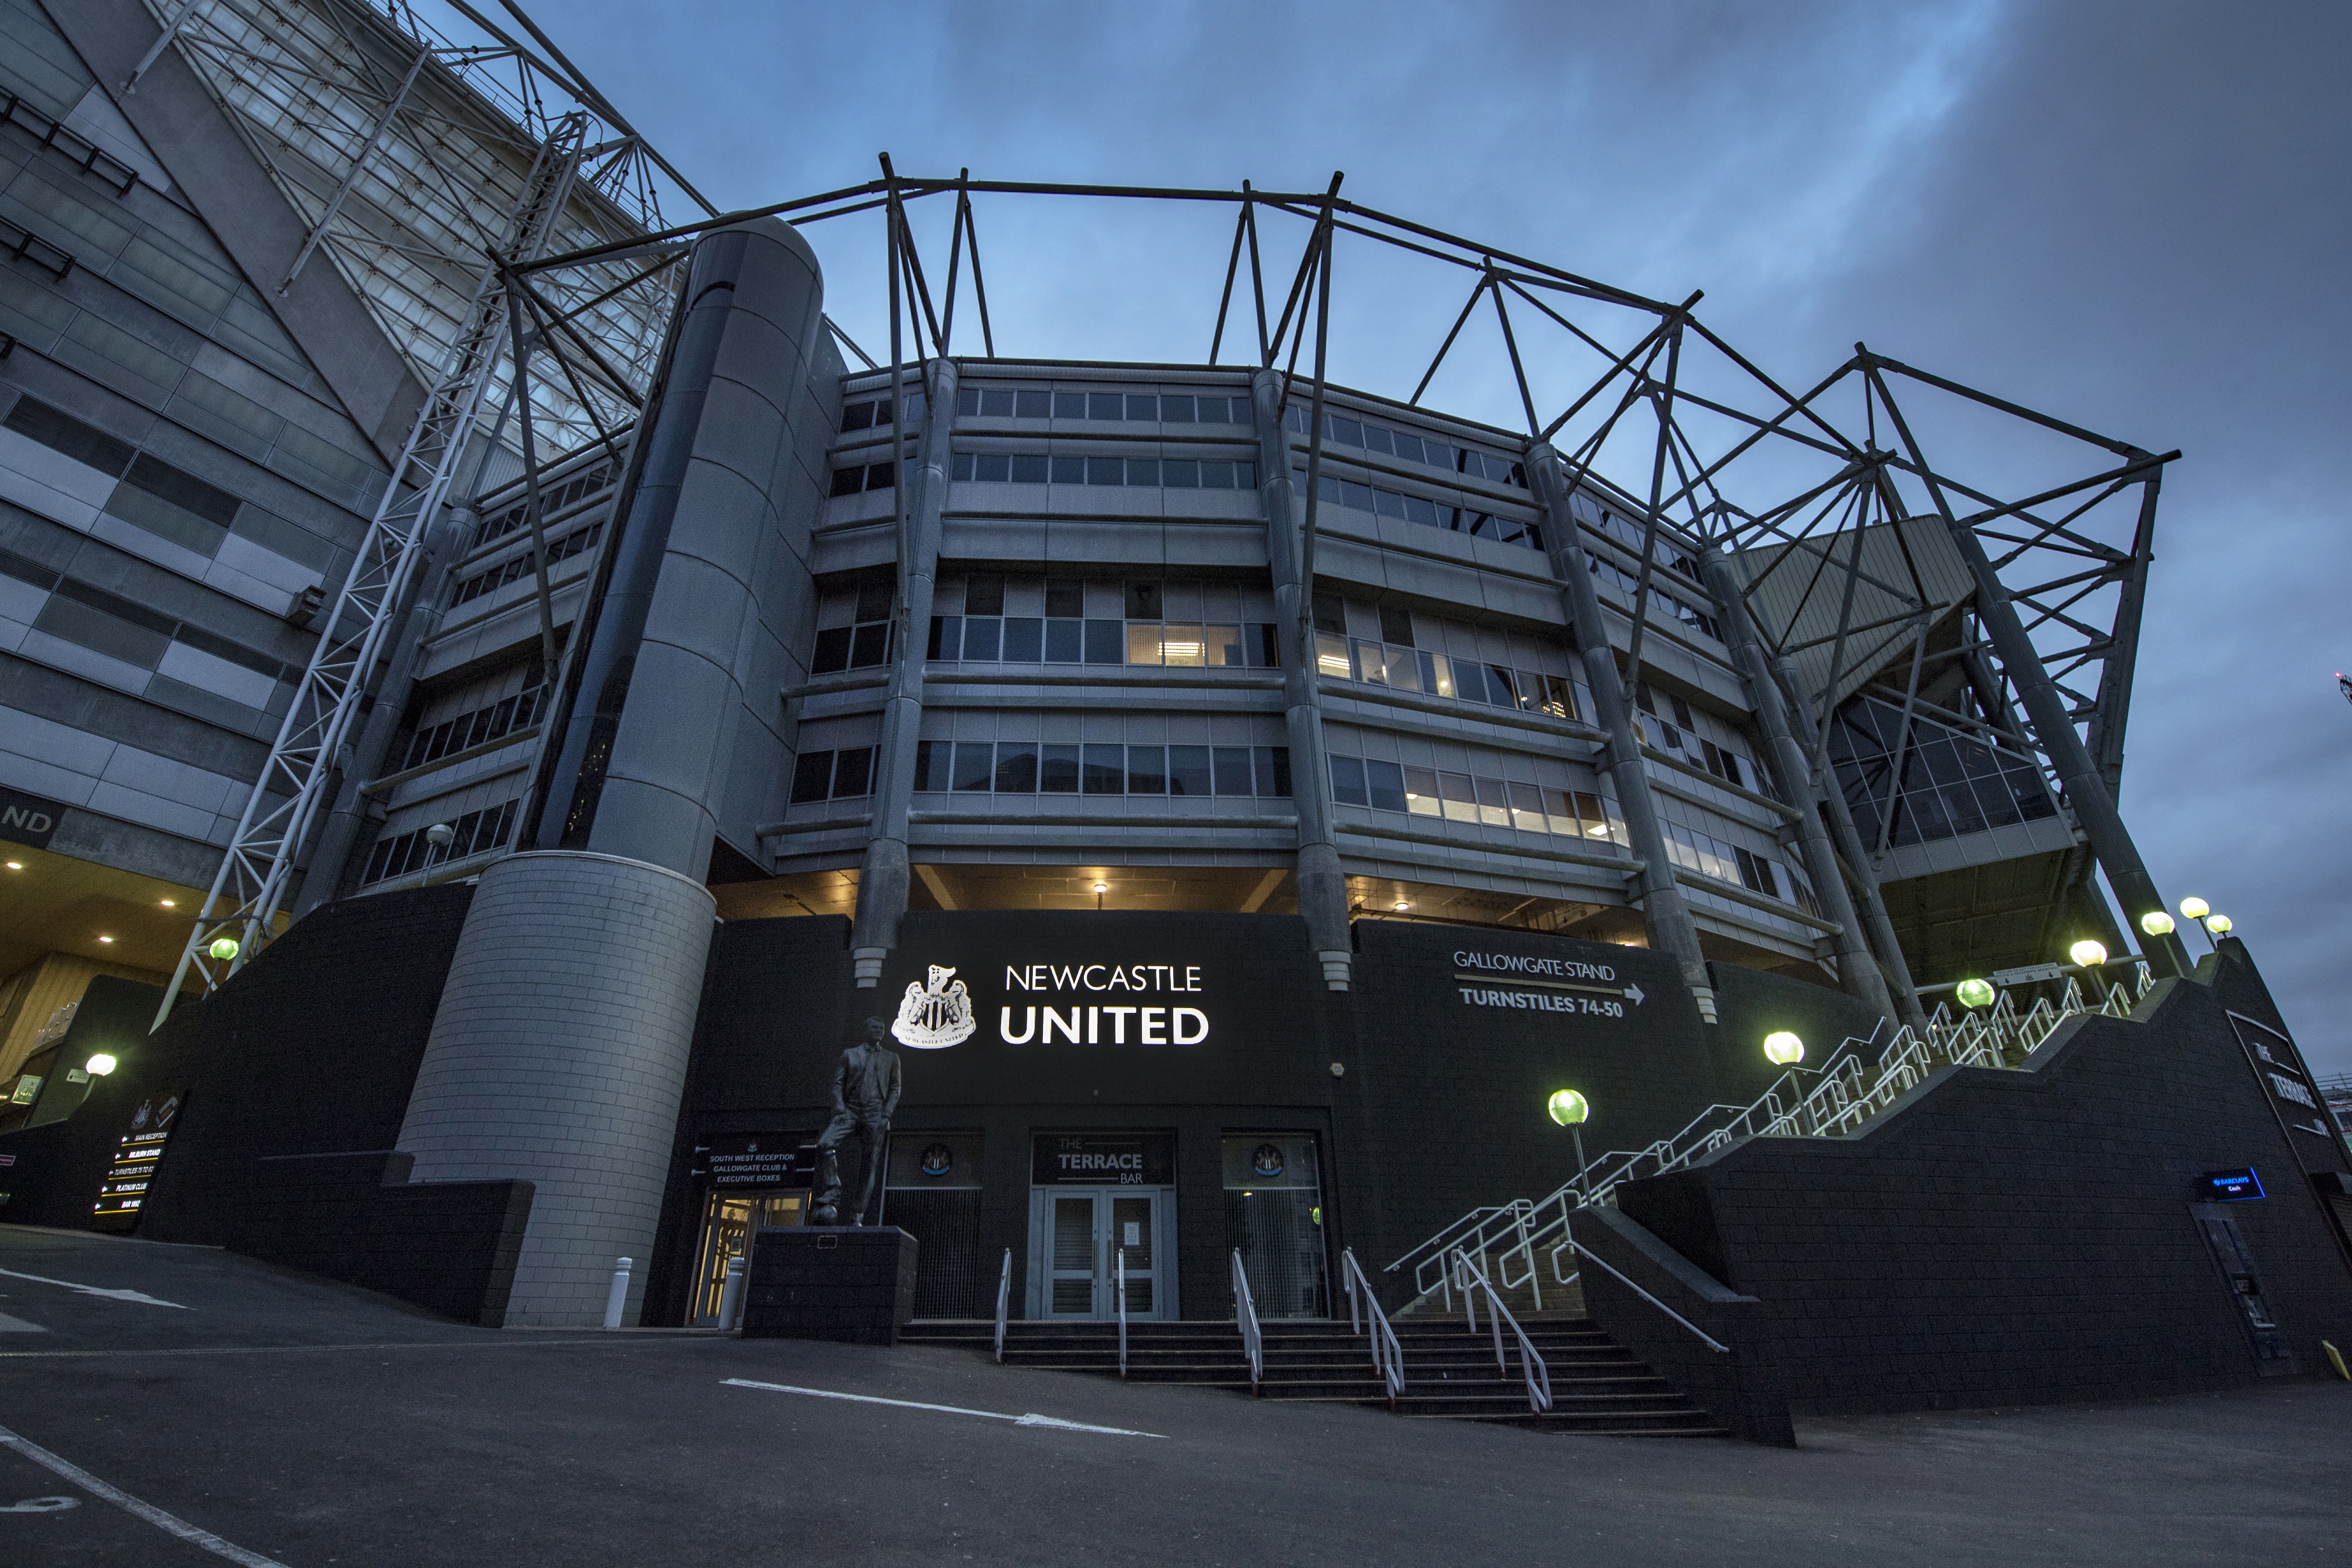 General View of St James’ Park, home of Newcastle United FC